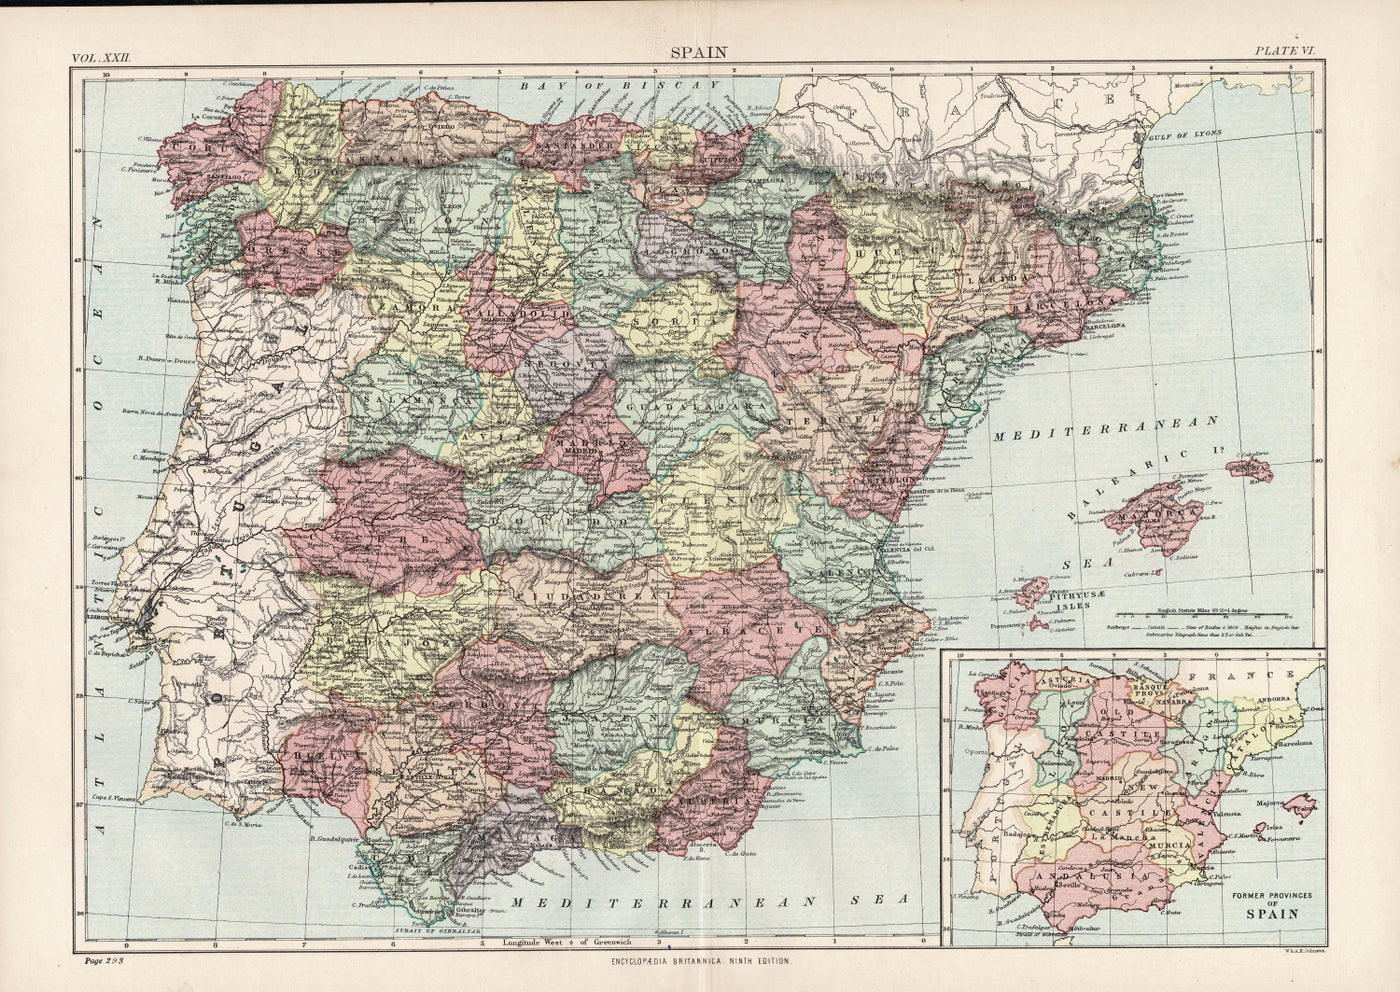 Spain antique map from Encyclopedia Britannica 1889